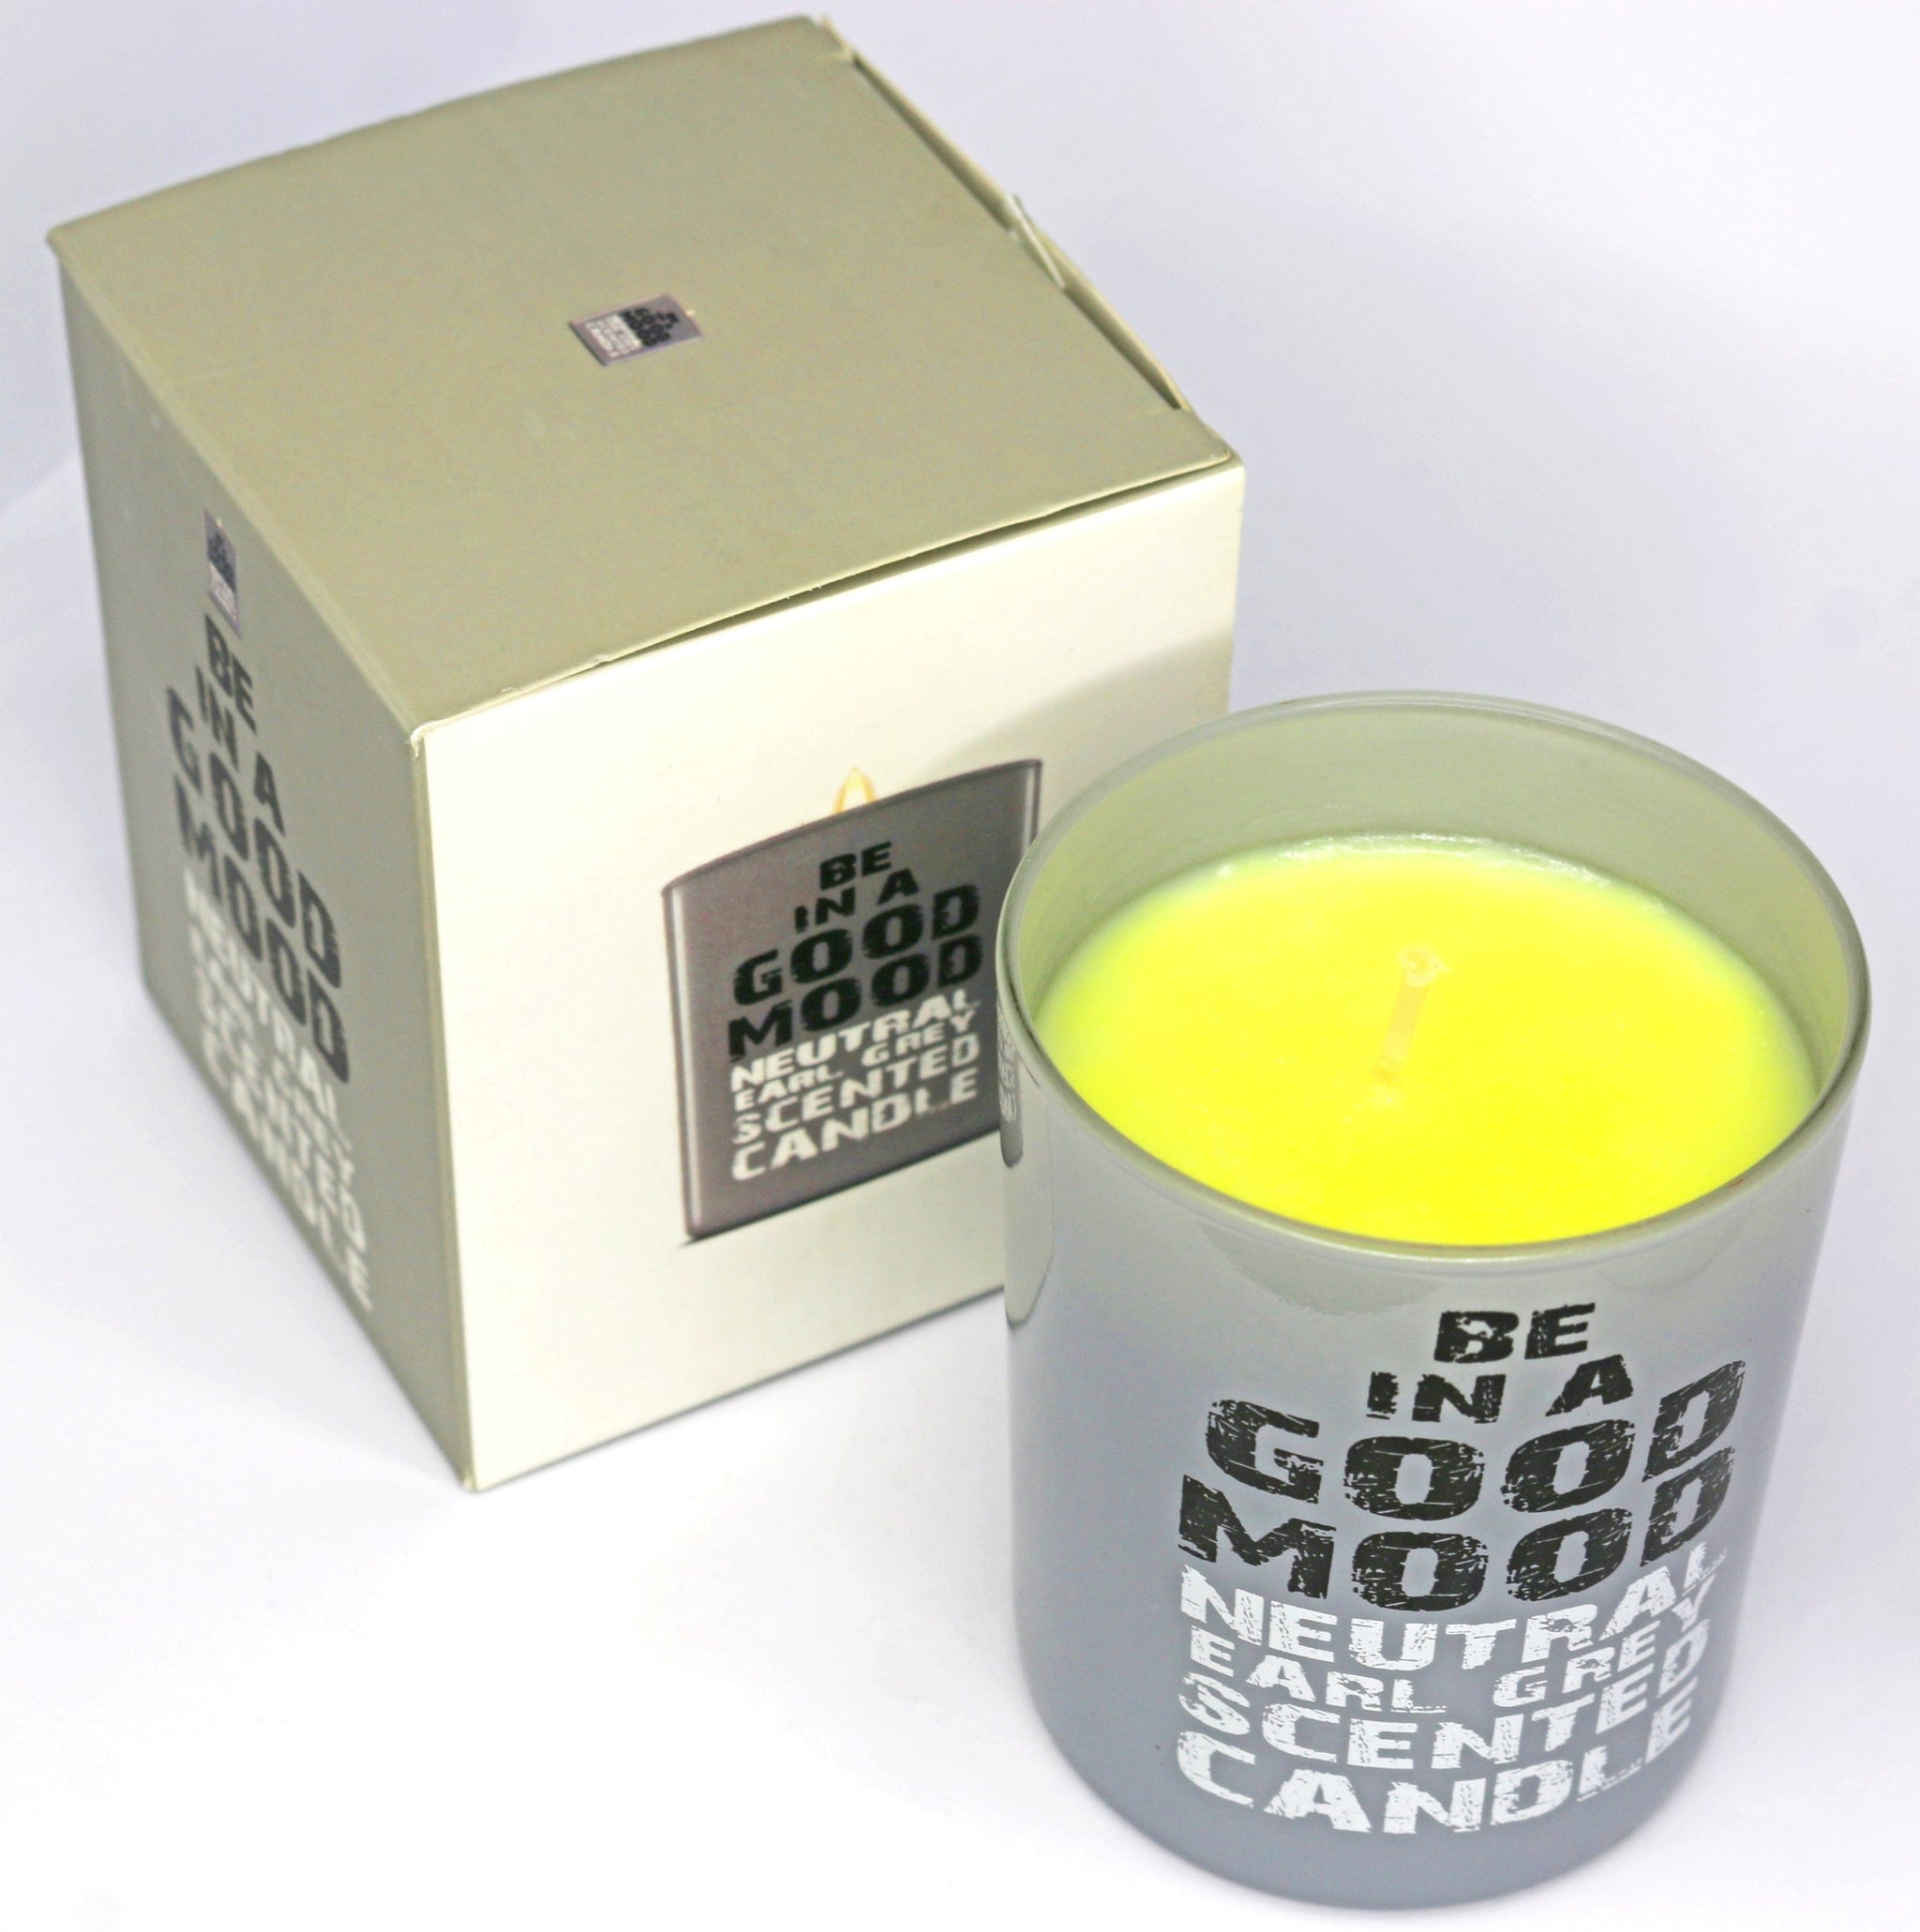 Be in a Good Mood Neutral Earl Grey Scented Candle